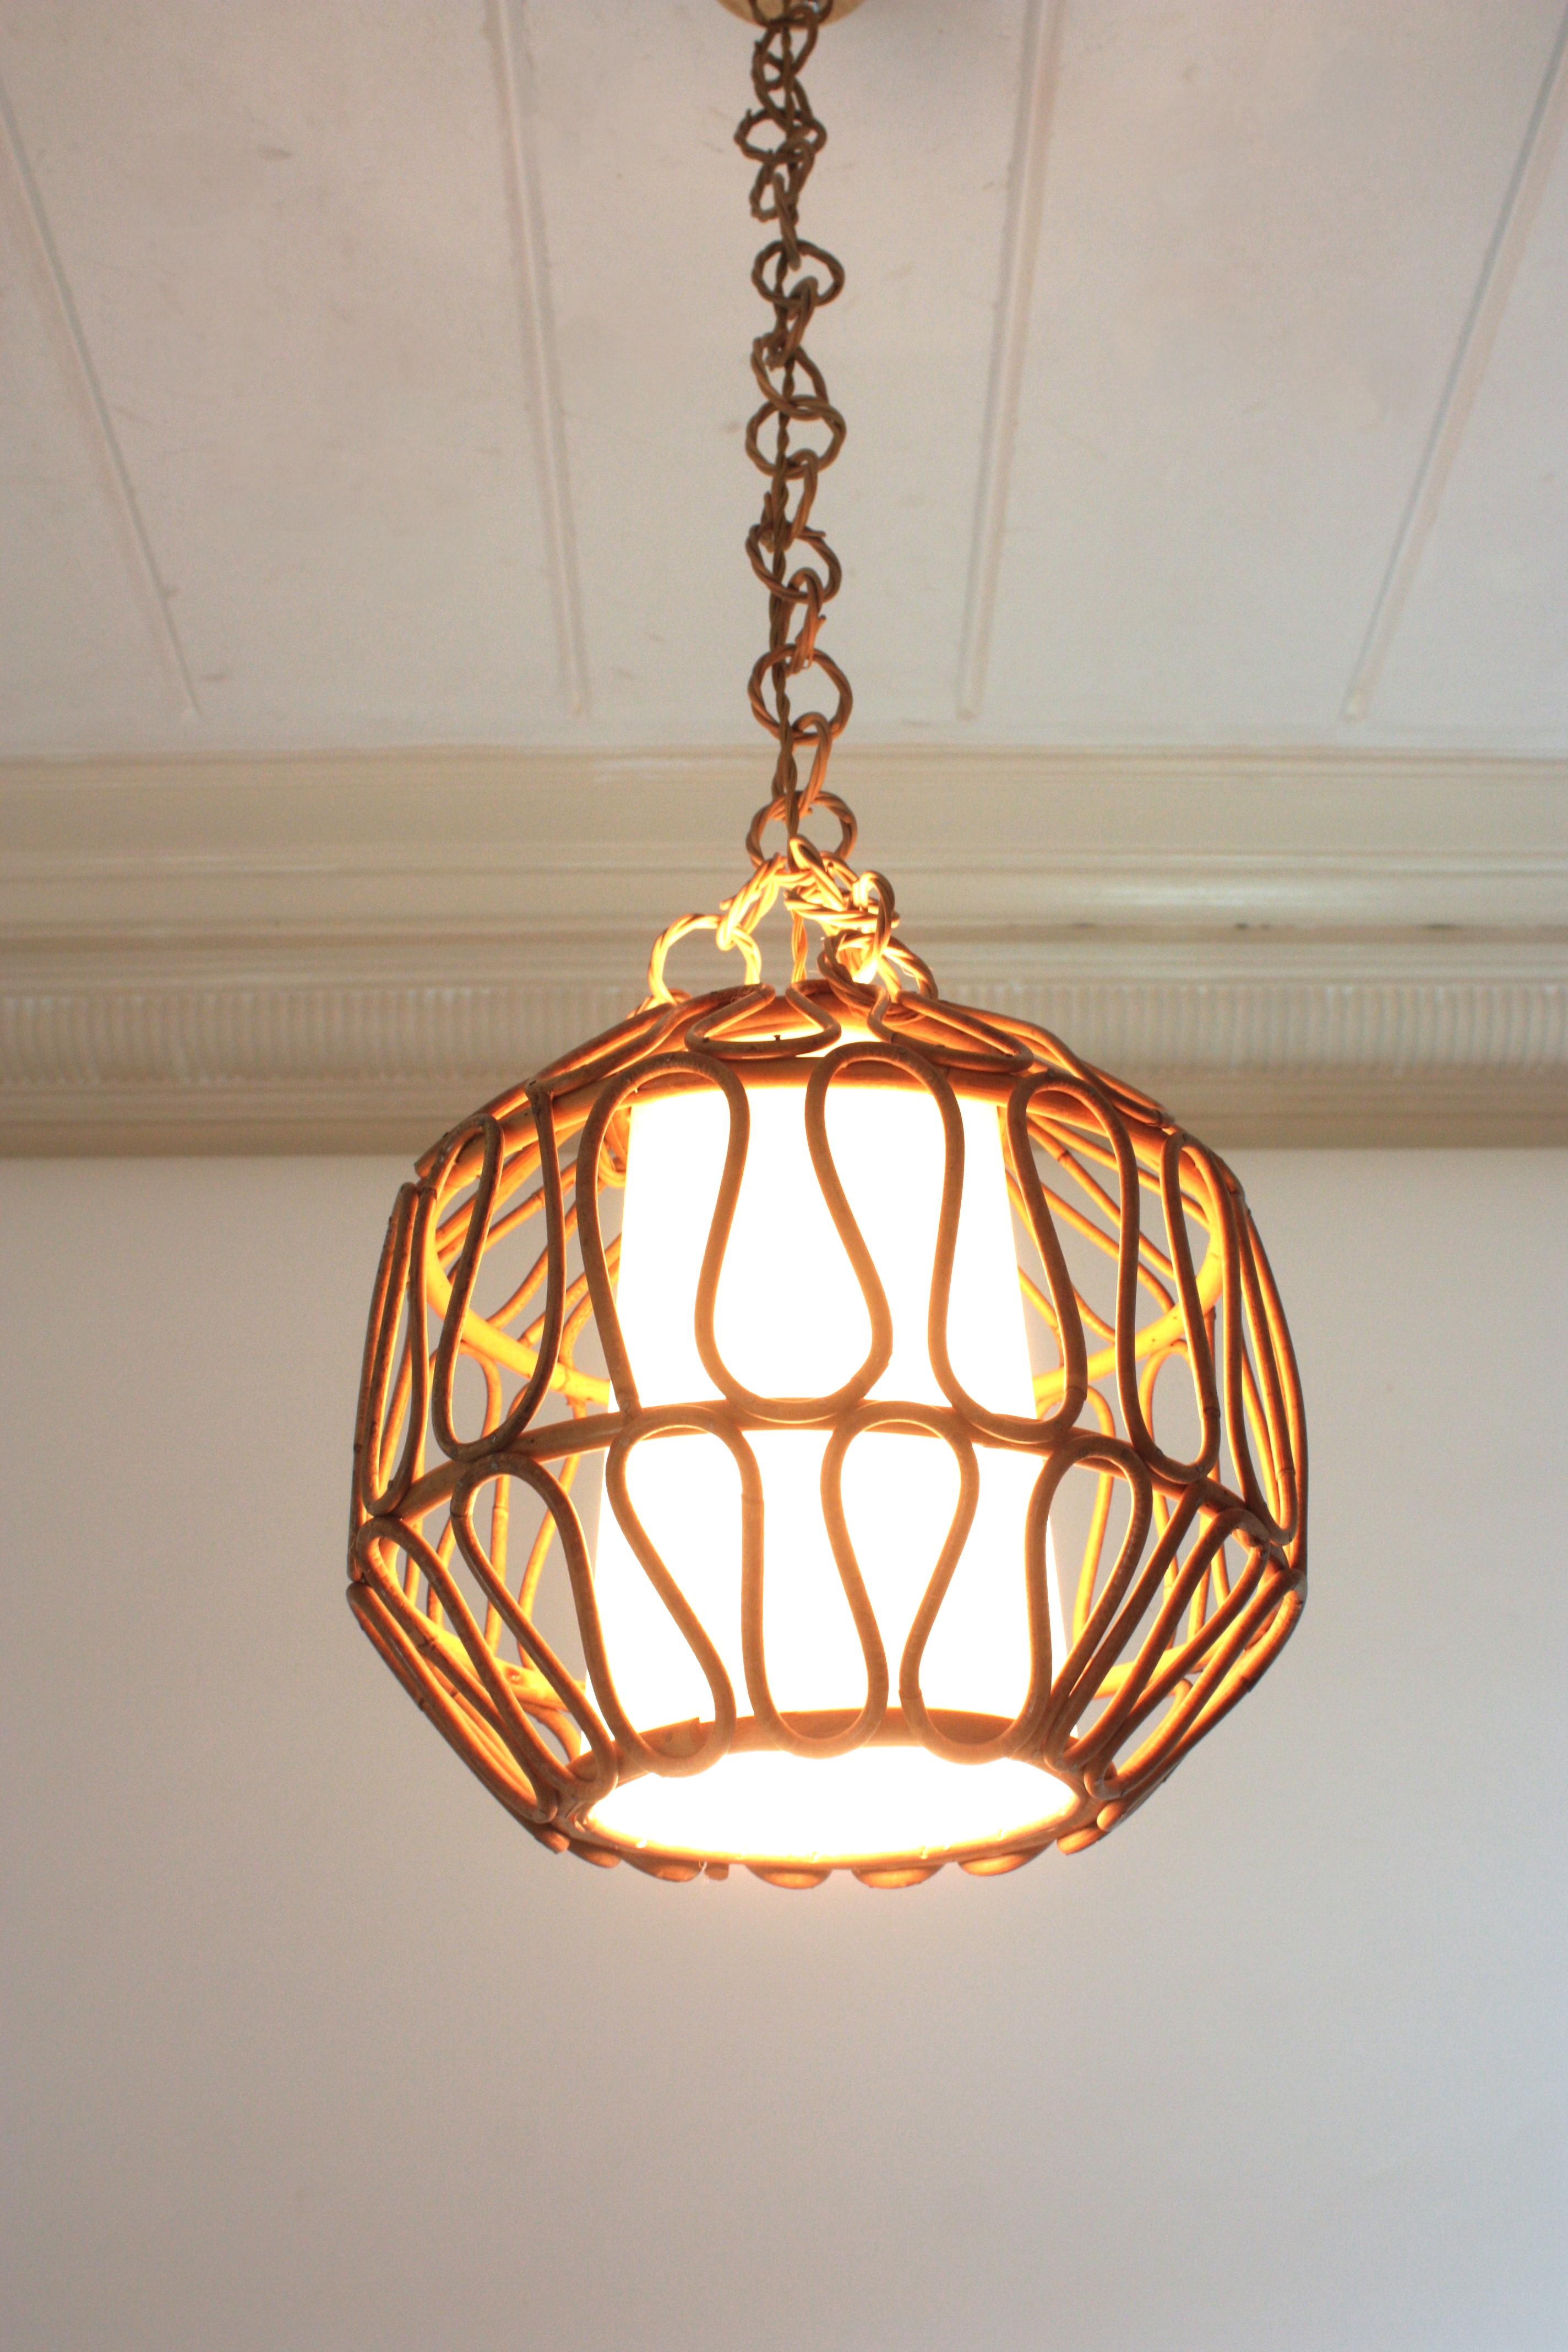 Rattan Globe Pendant Light or Lantern with Loop Details, Spain, 1960s For Sale 5